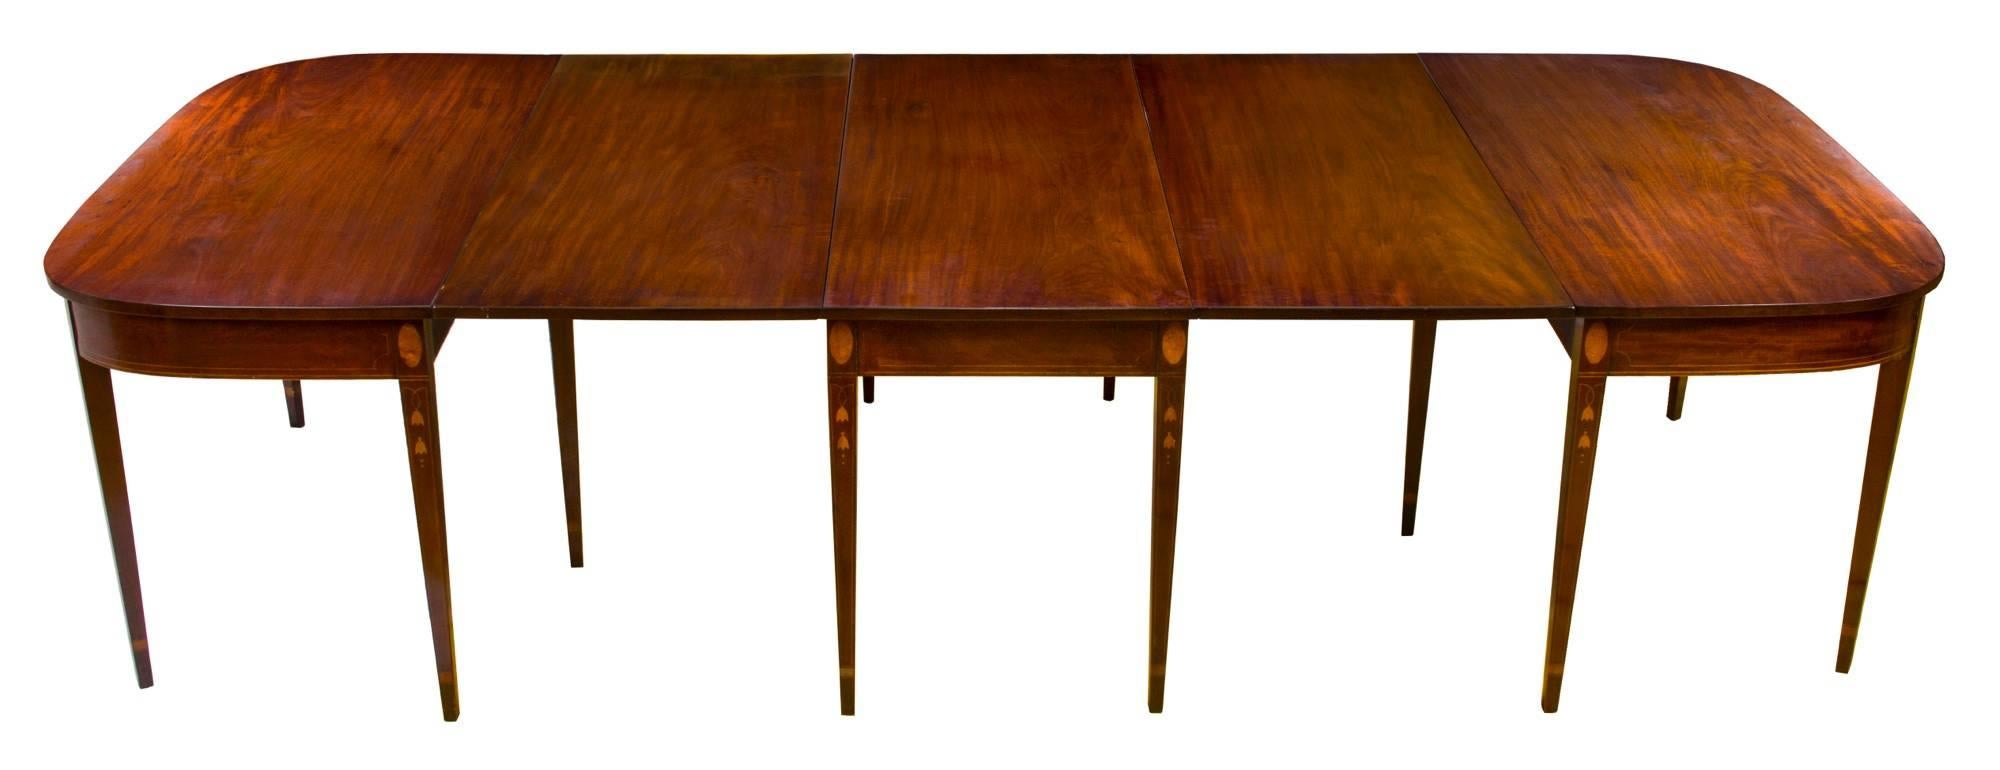 This banquet table is a celebration of magnificent solid strikingly vibrant and ribboned mahogany wood, all supported on strongly tapered legs with traditional bellflower and satinwood inlaid ovals (see close-ups). As you will note, the work is